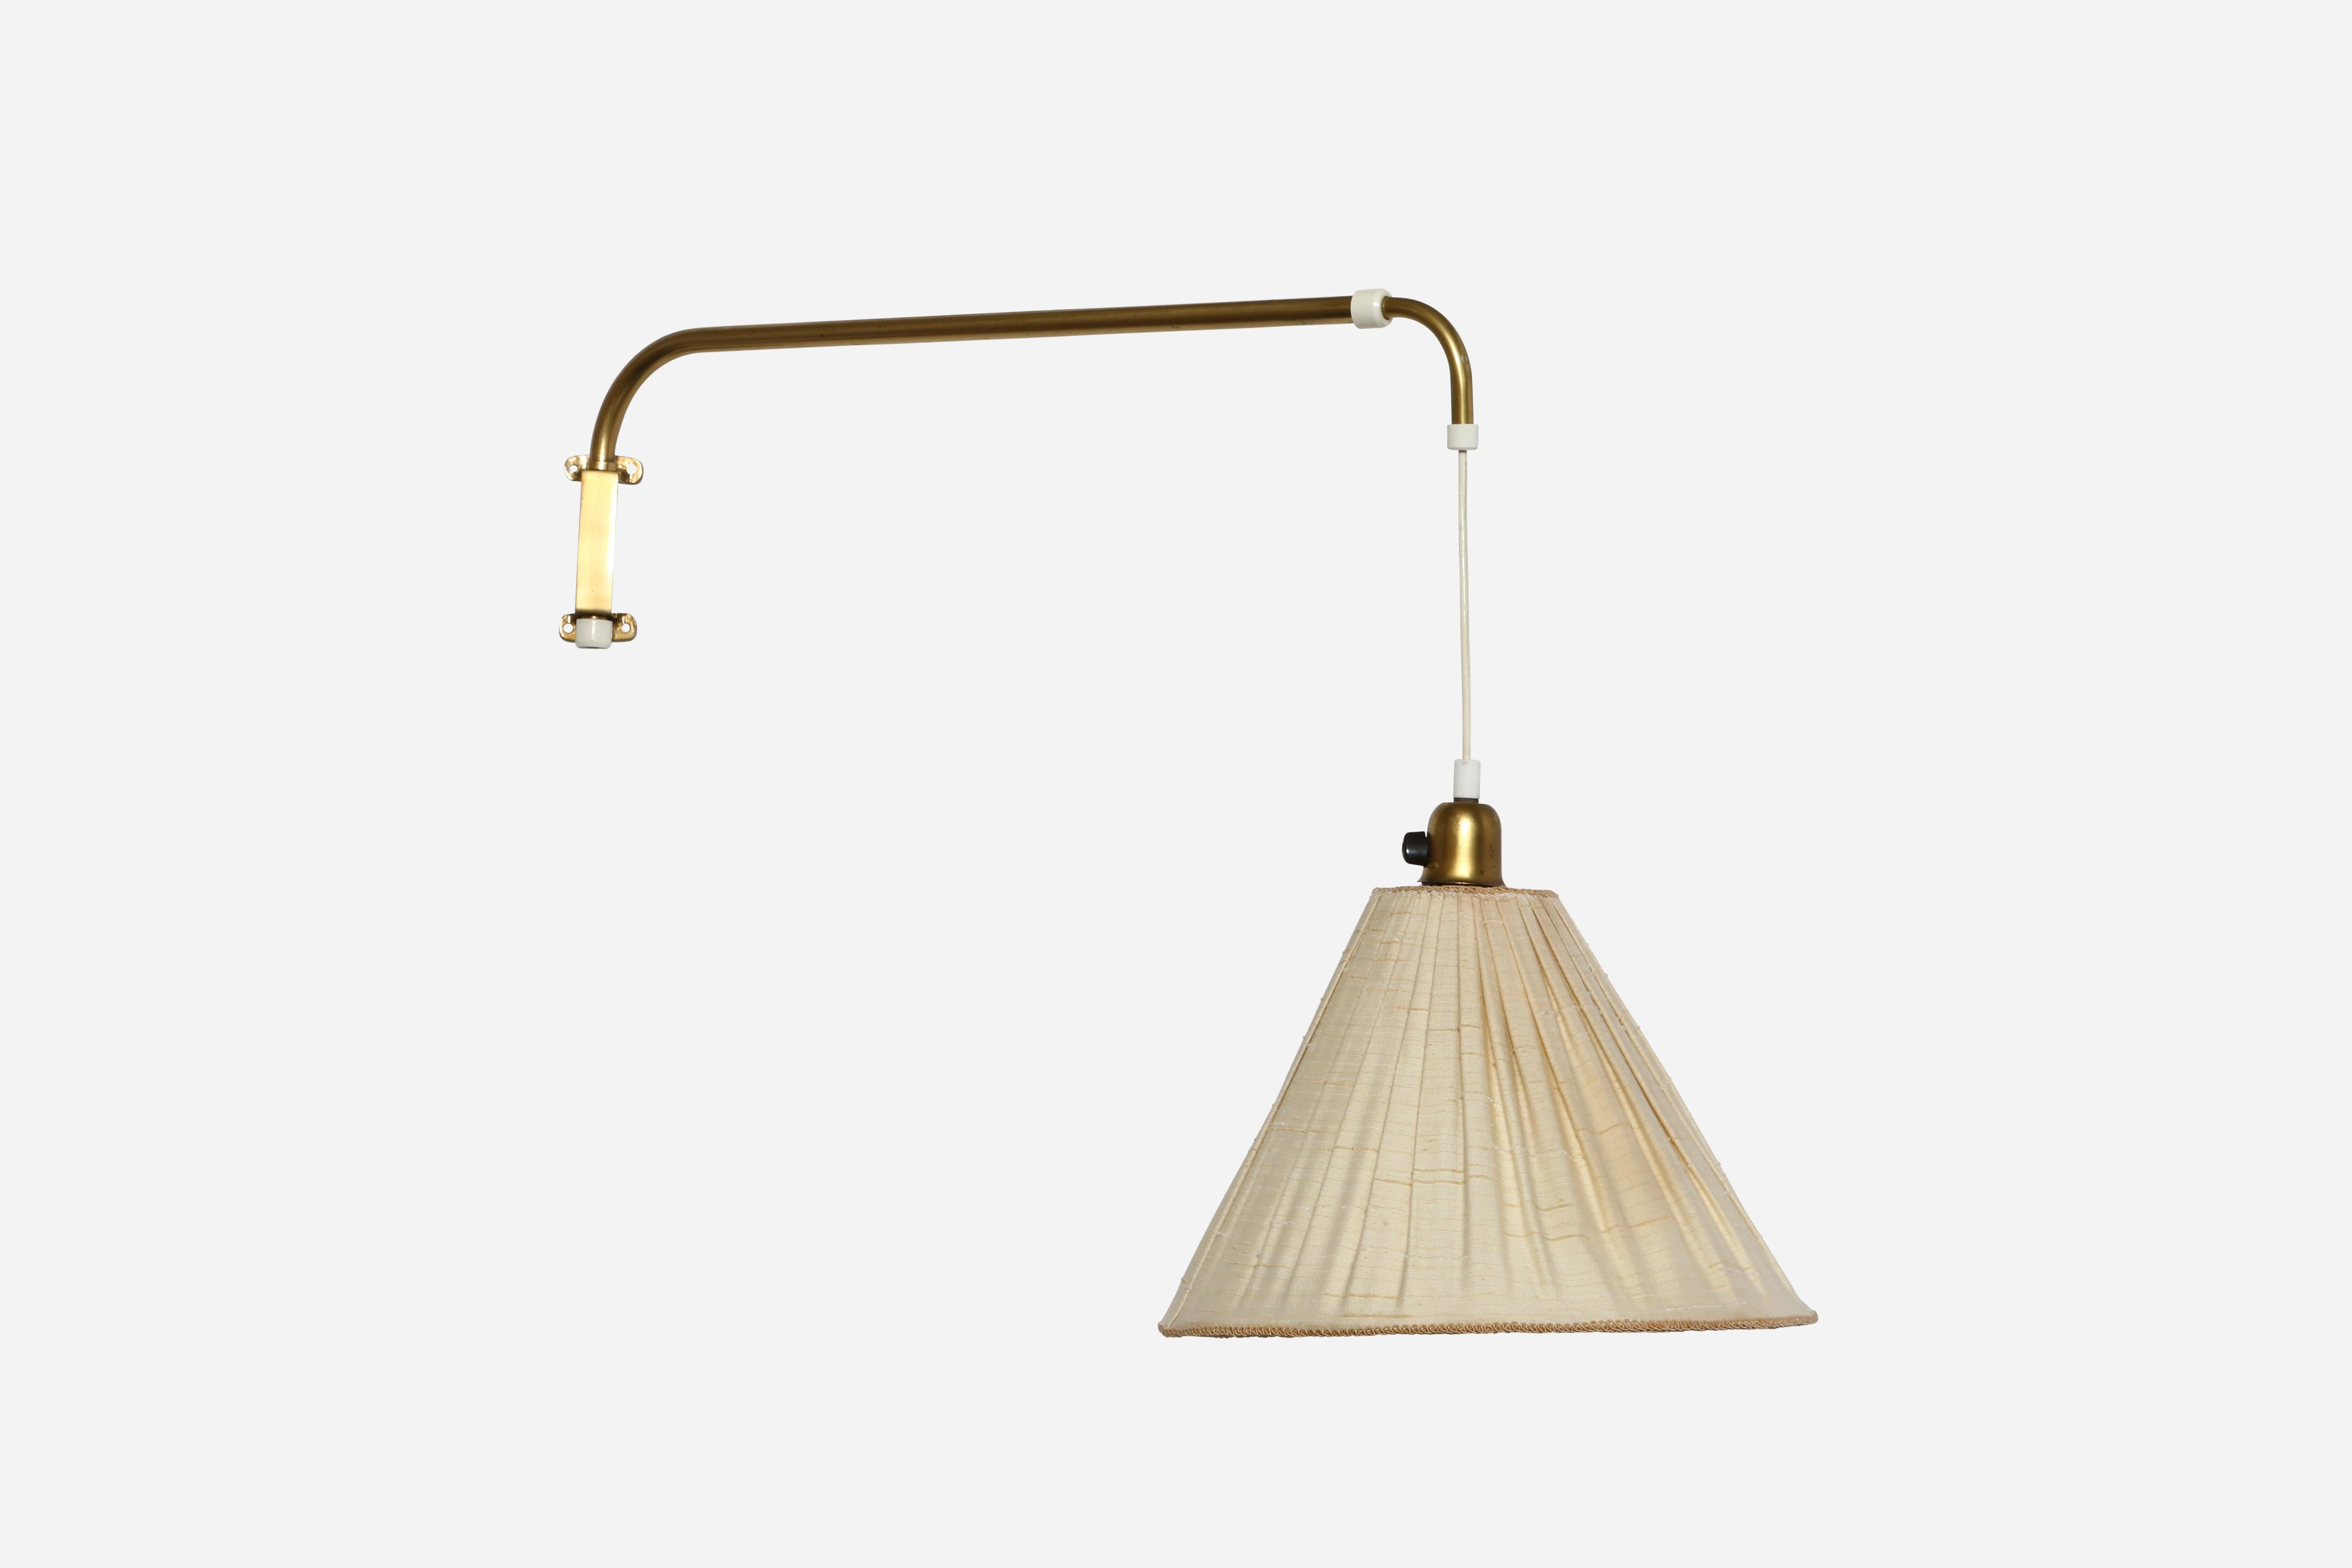 Telescopic extendable brass wall lamp.
Made in Sweden in 1940s
Original fabric shade.
The shortest length is 23 inches
Longest - 38 inches
Designed as plug-in with the cord.
Complimentary US rewiring upon request.
Shade is 14 inches in diameter.

We